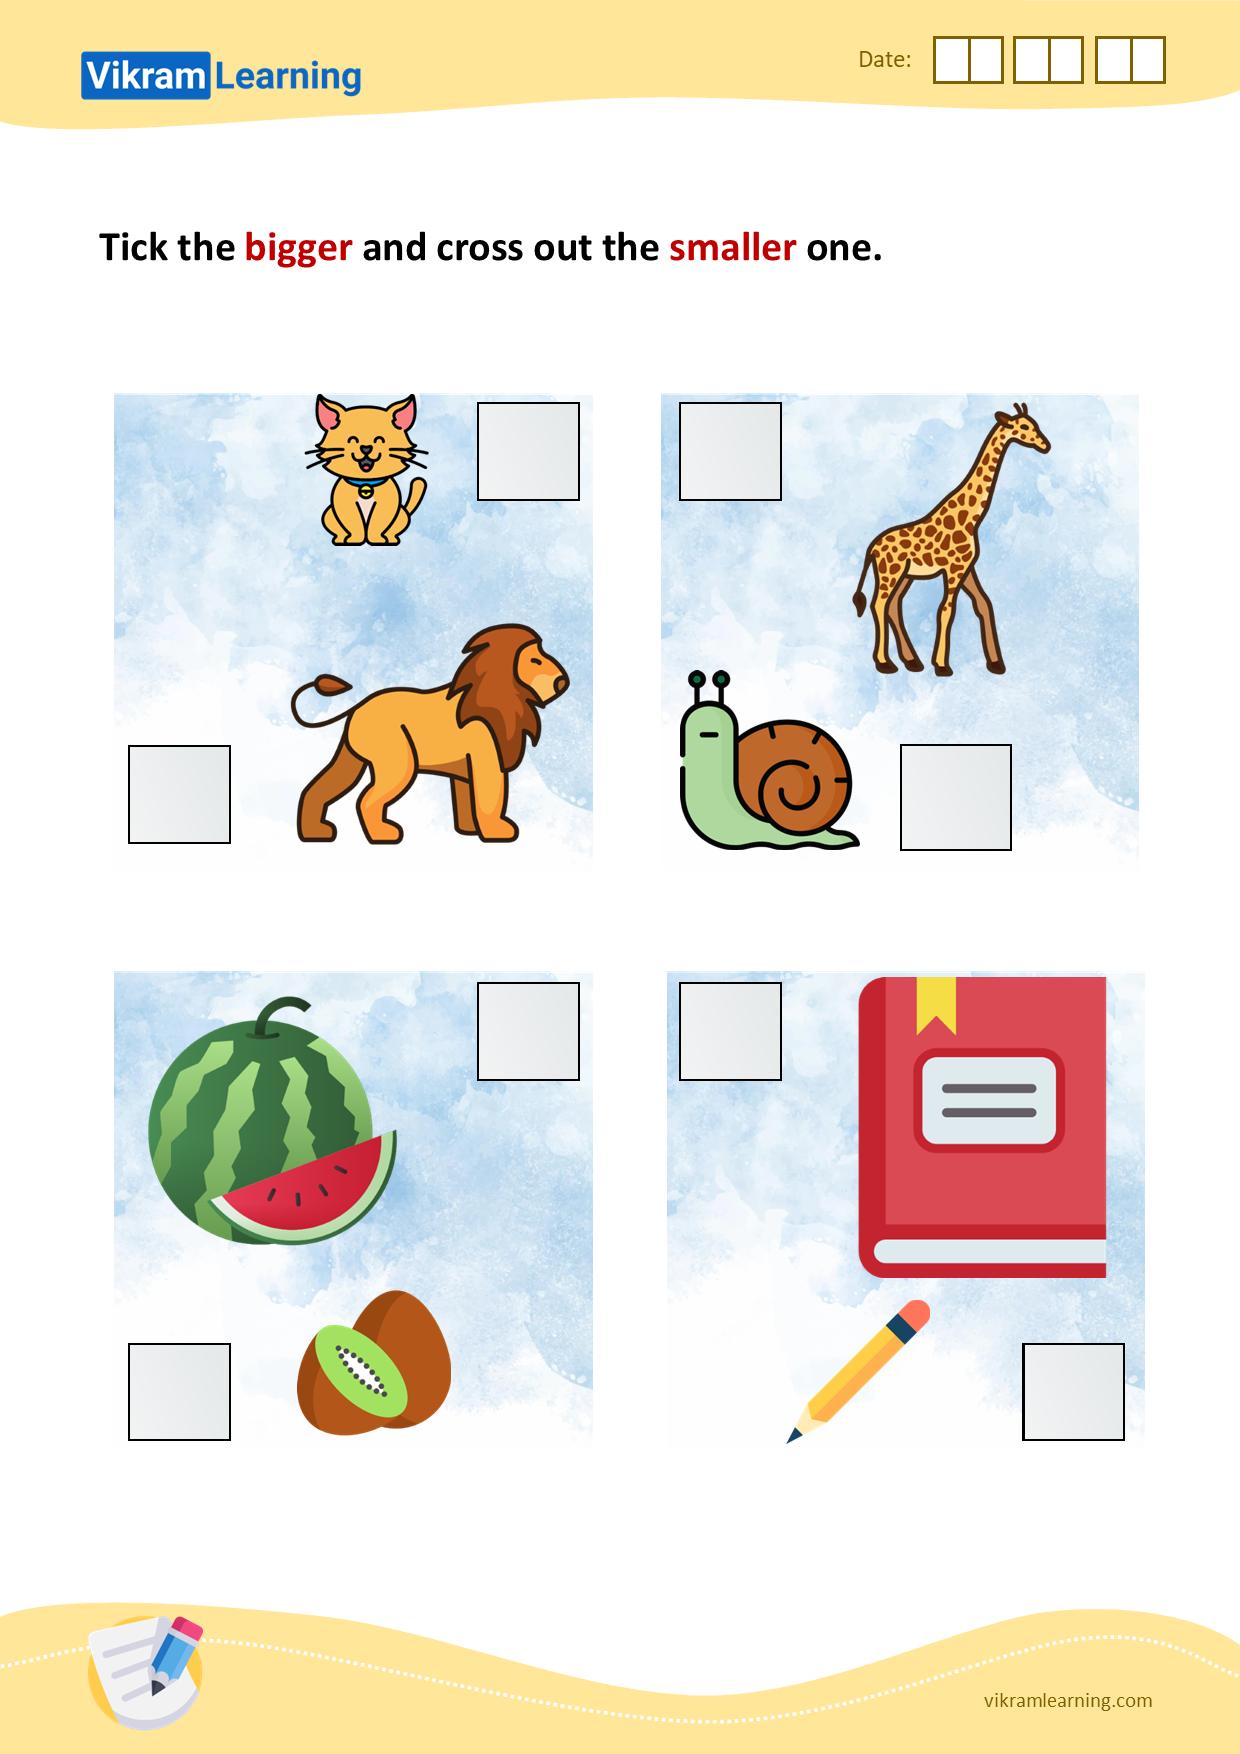 Download tick the bigger one and cross out the smaller one - 2 worksheets